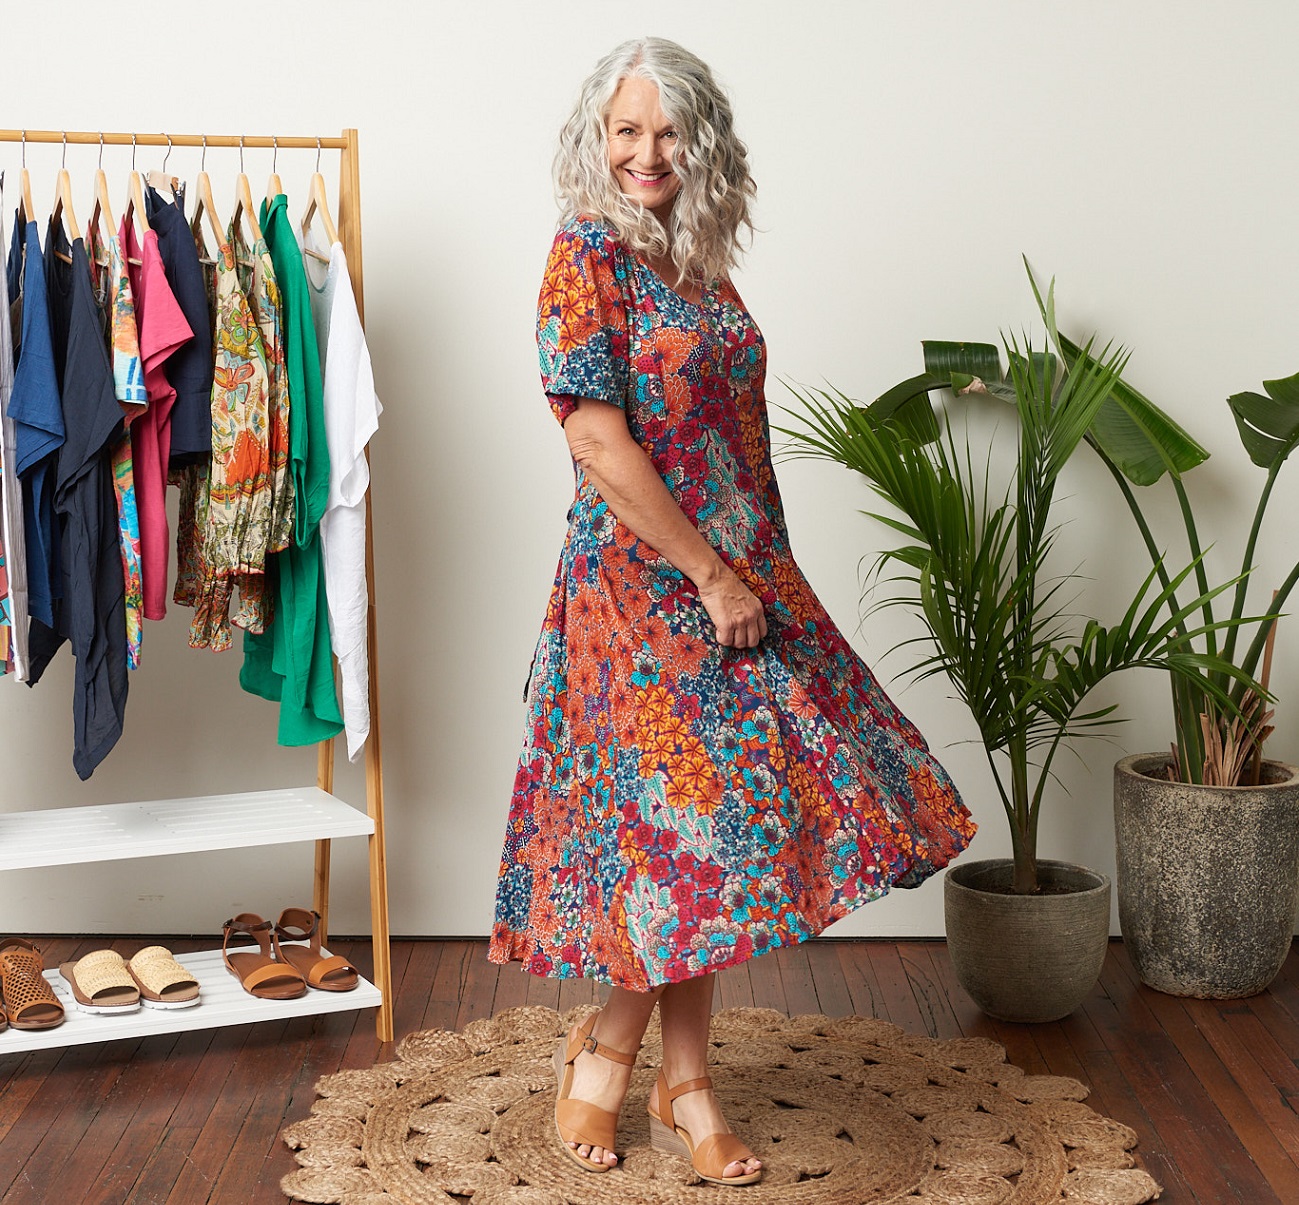 https://www.retailbiz.com.au/wp-content/uploads/2021/11/Web-Only-Starts-at-60-pushes-into-mature-womens-fashion-and-footwear_image-2.jpg